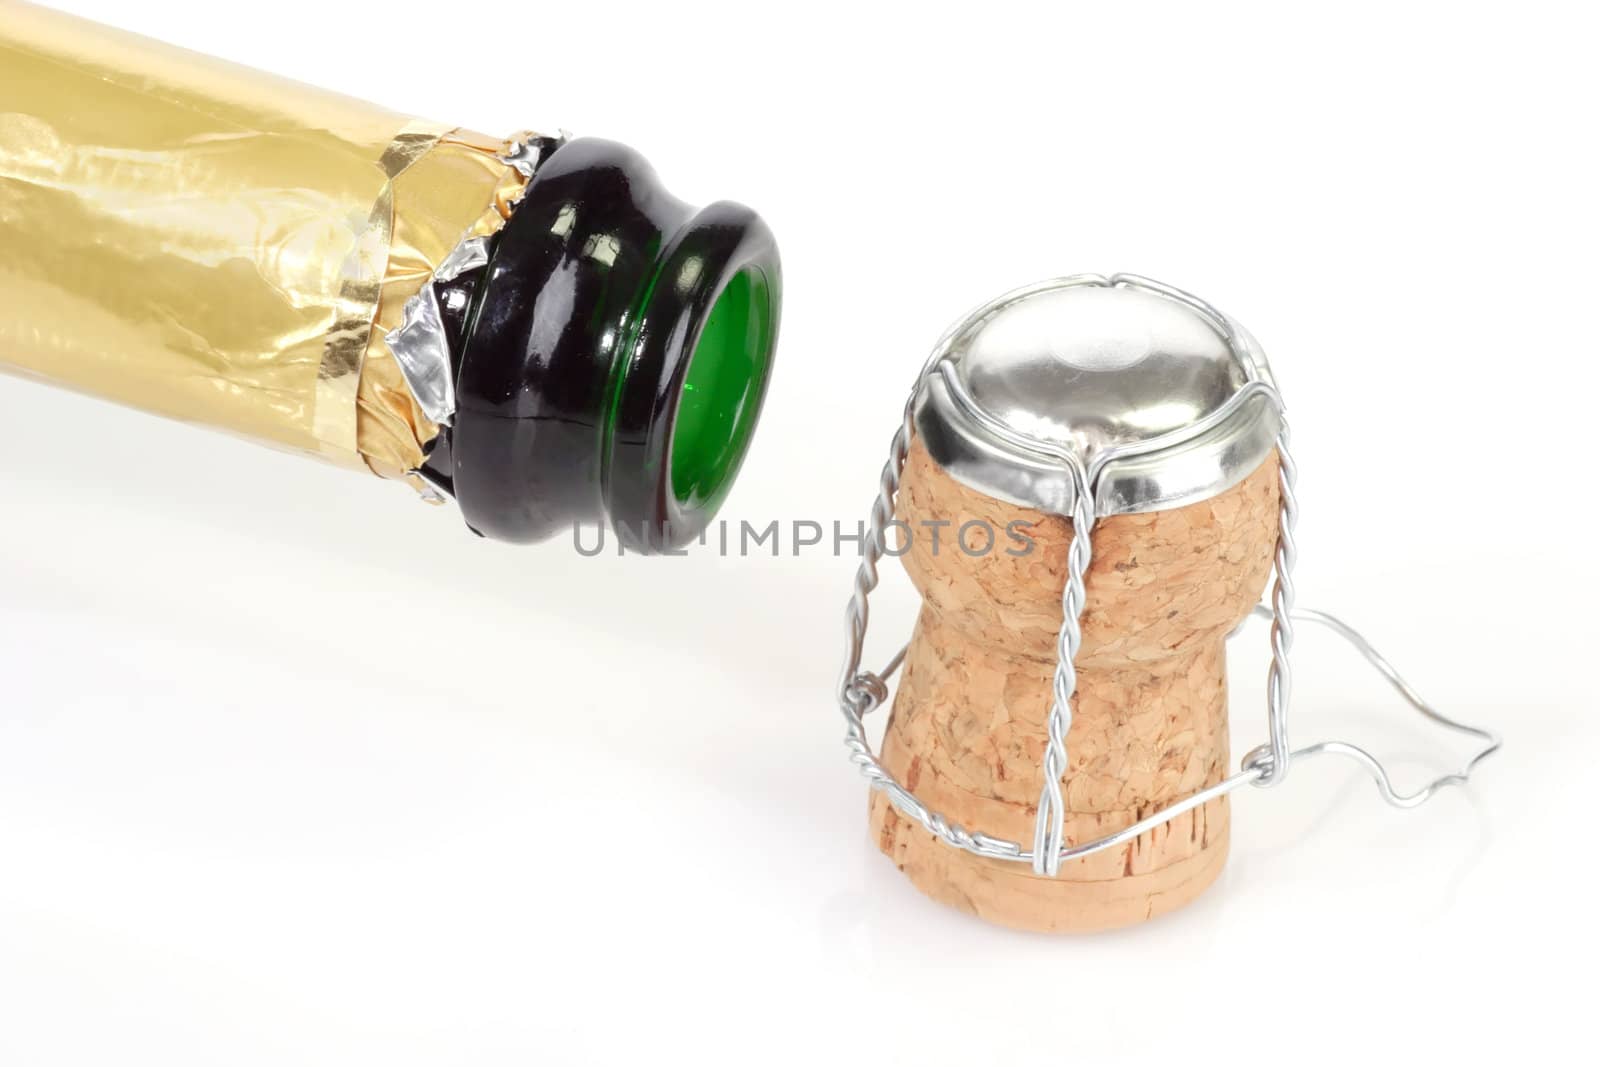 Open champagne bottle with cork on white background